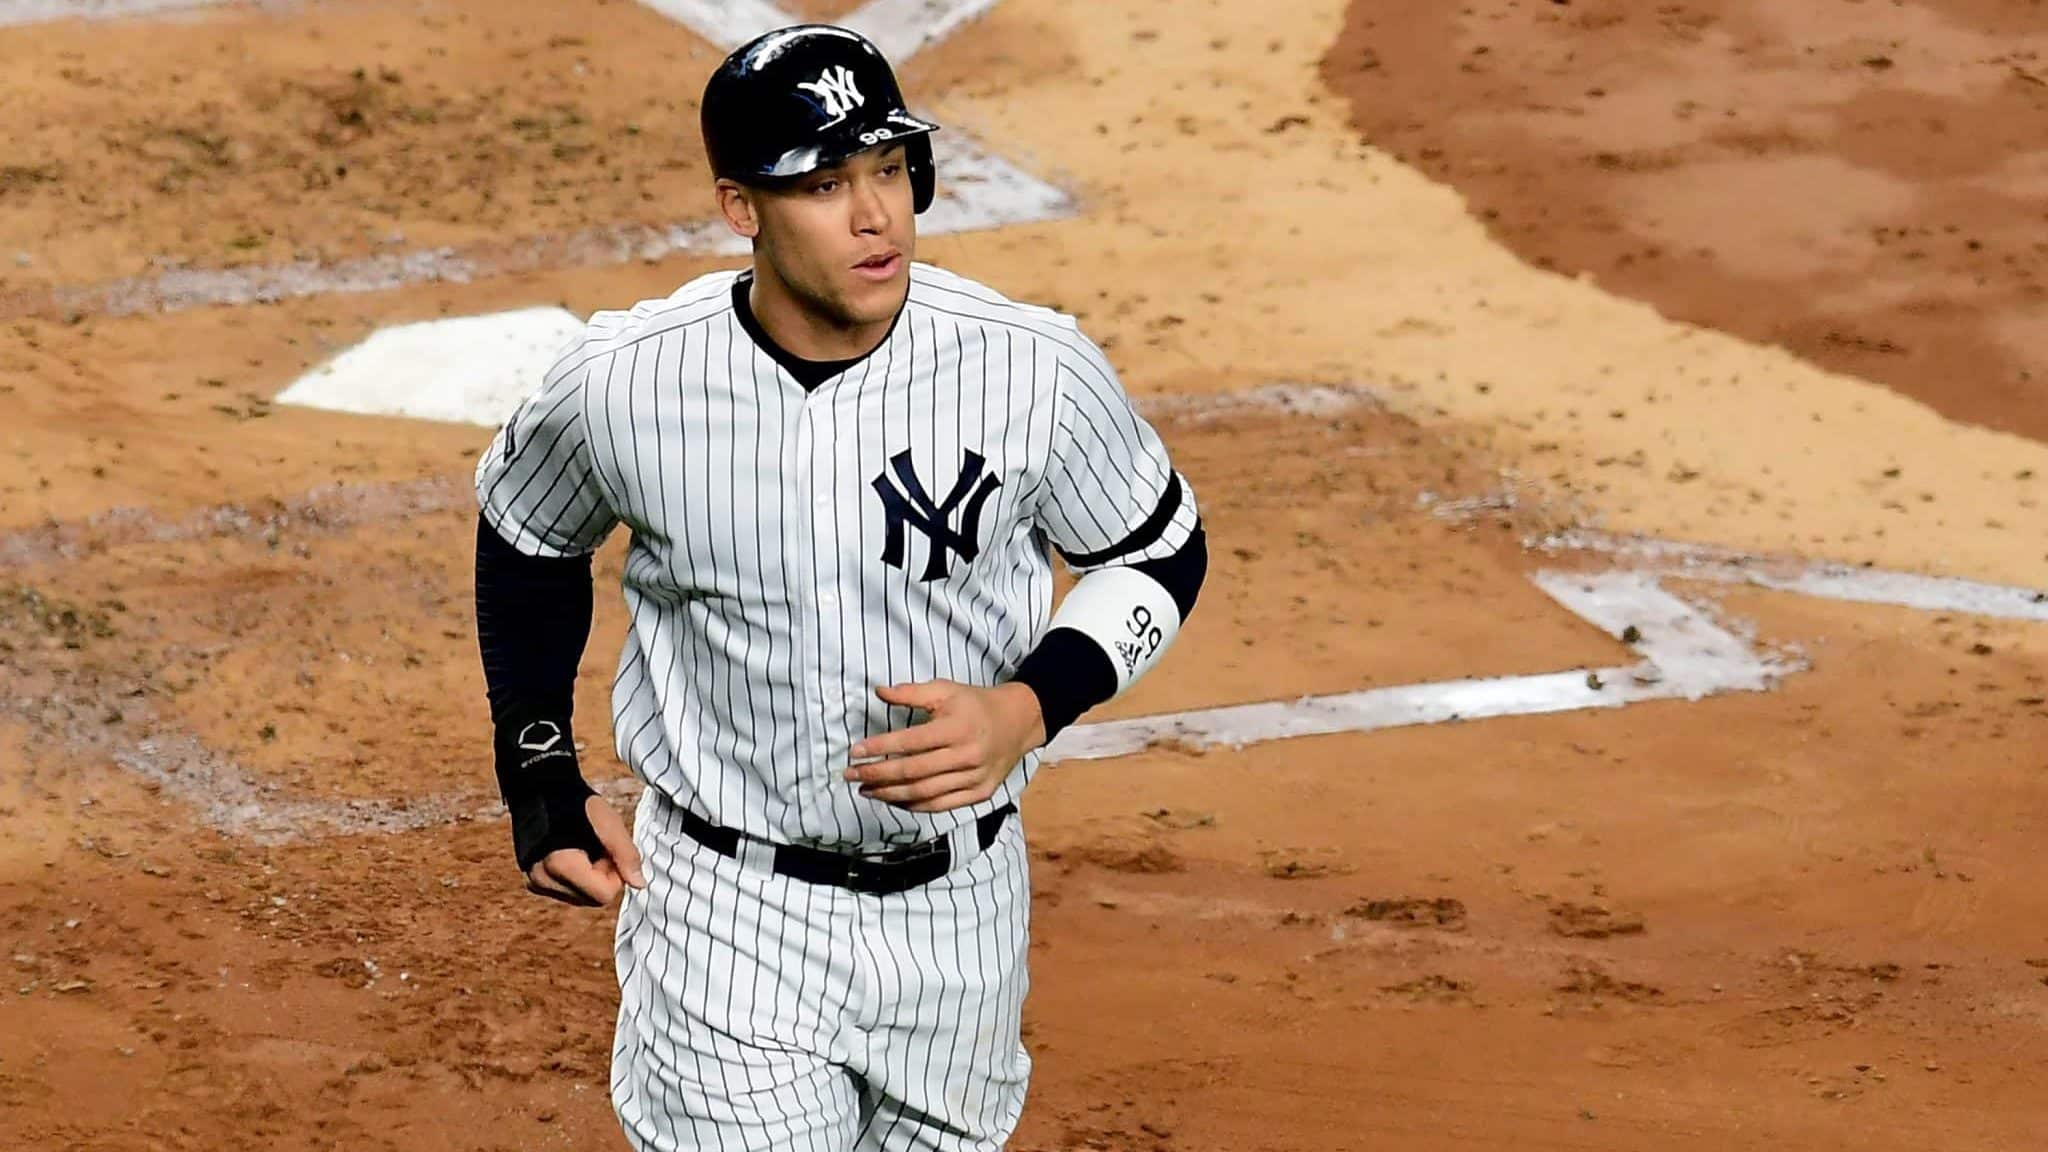 NEW YORK, NEW YORK - OCTOBER 17: Aaron Judge #99 of the New York Yankees looks on after scoring a run on a walk in the first inning against the Houston Astros during game three of the American League Championship Series at Yankee Stadium on October 17, 2019 in the Bronx borough of New York City.